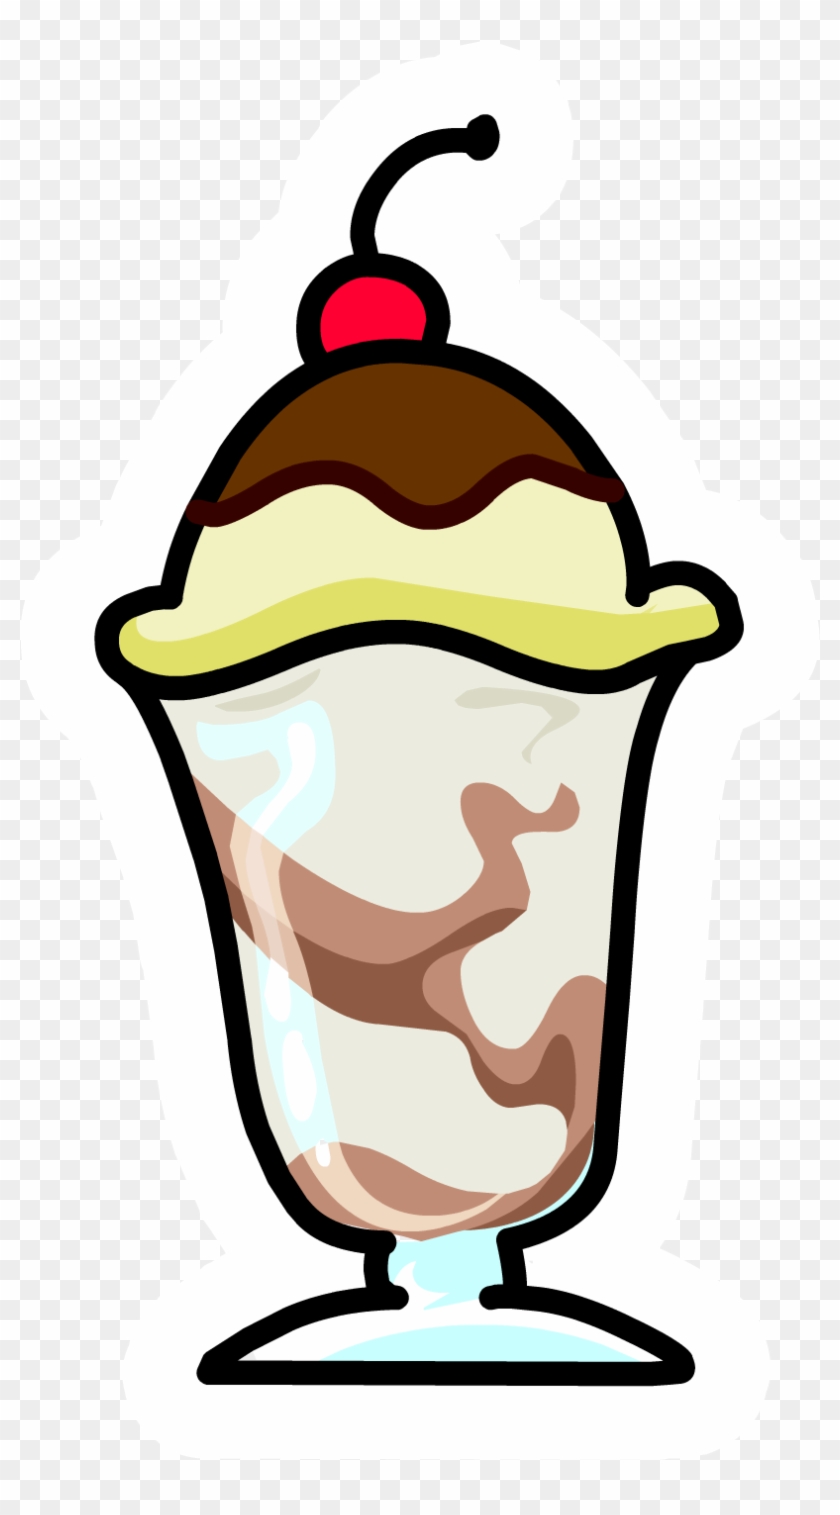 Clip Arts Related To - Cartoon Pictures Of Ice Cream Sundaes - Png Download #842595